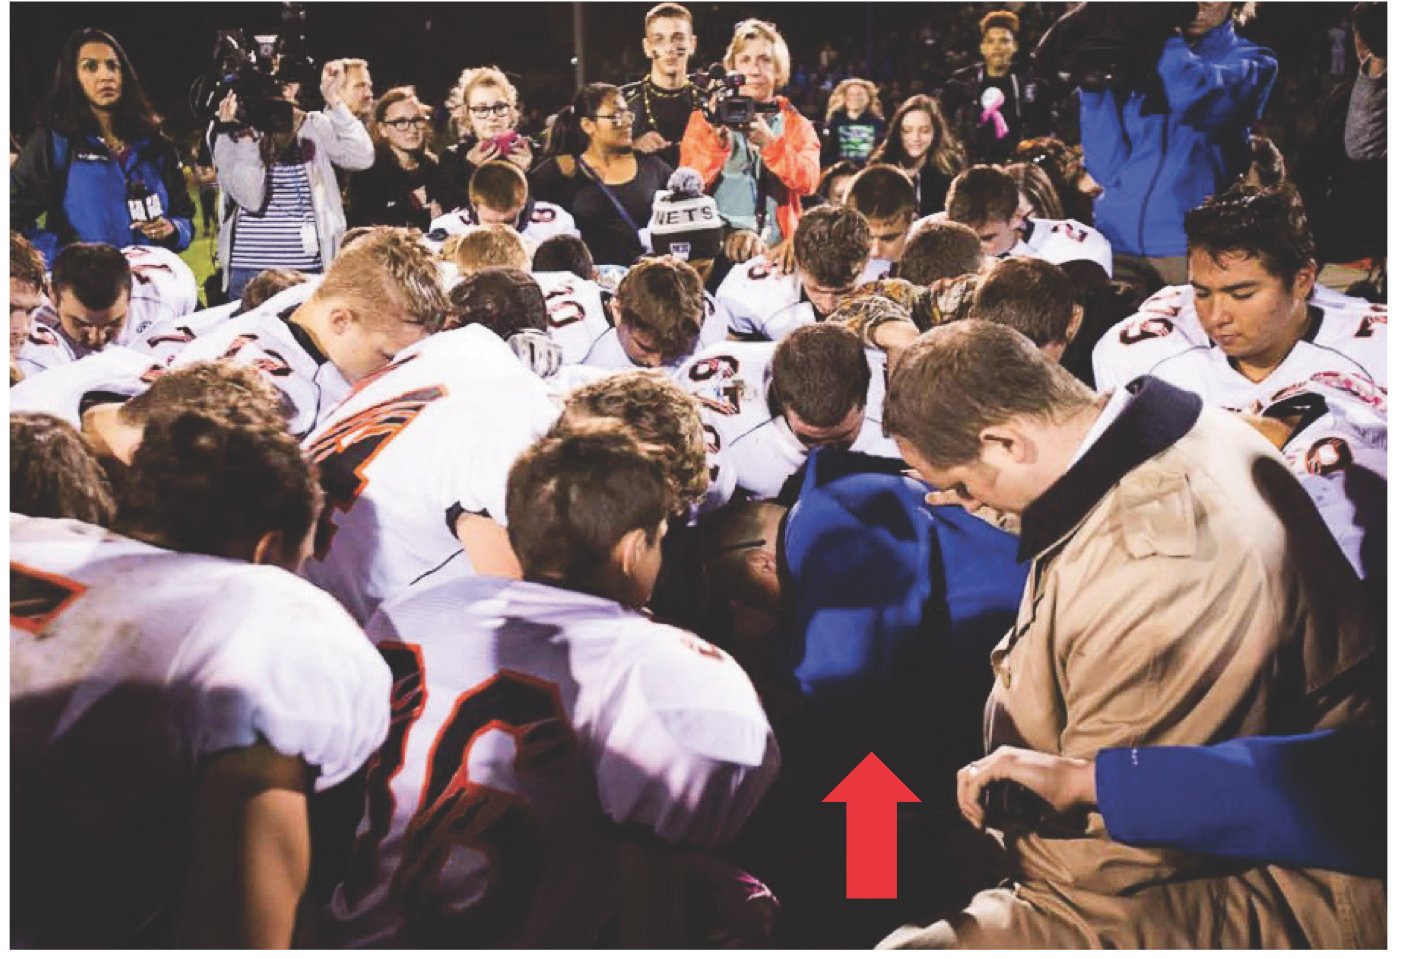 Students being led in prayer by their coach at a Bremerton School District high school. A red arrow is juxtaposed on the image pointing to the coach.